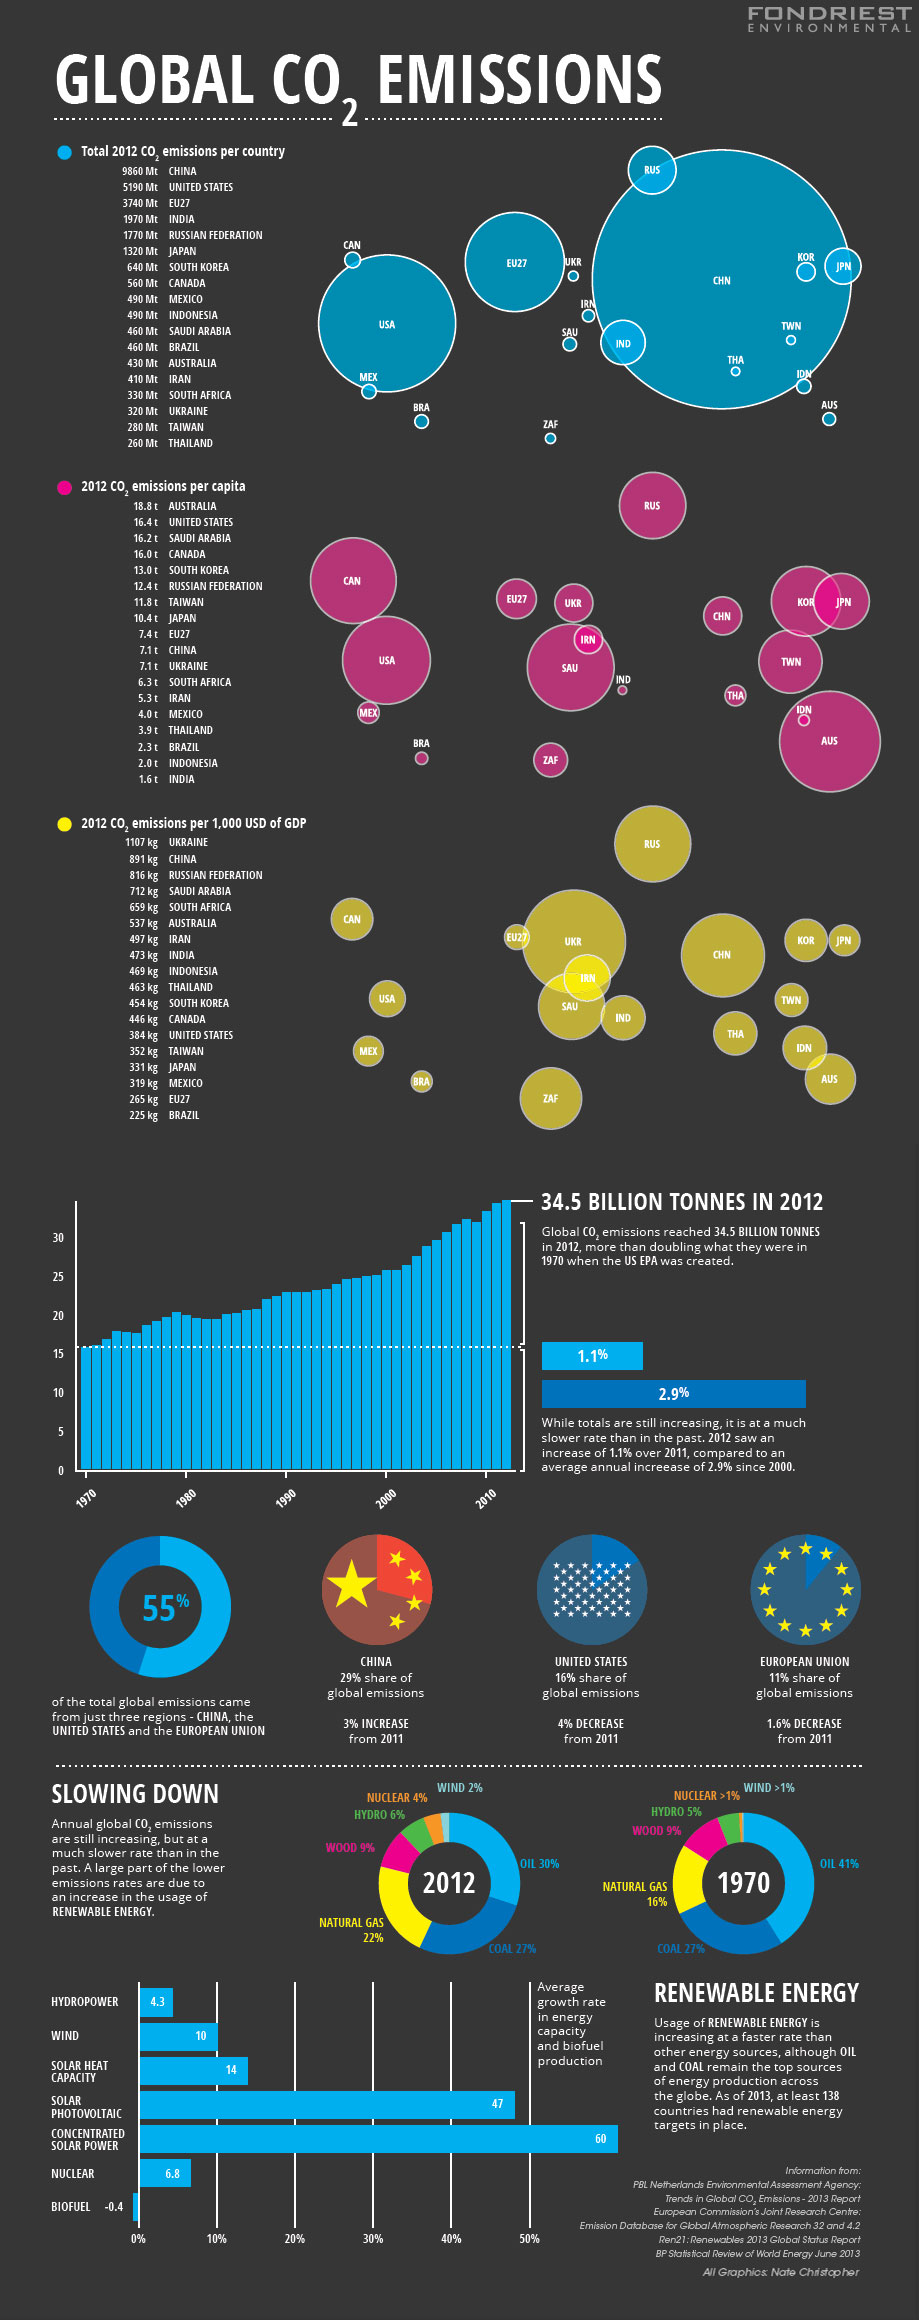 Global Carbon Dioxide Emissions infographic (Credit: Nate Christopher / Fondriest Environmental)